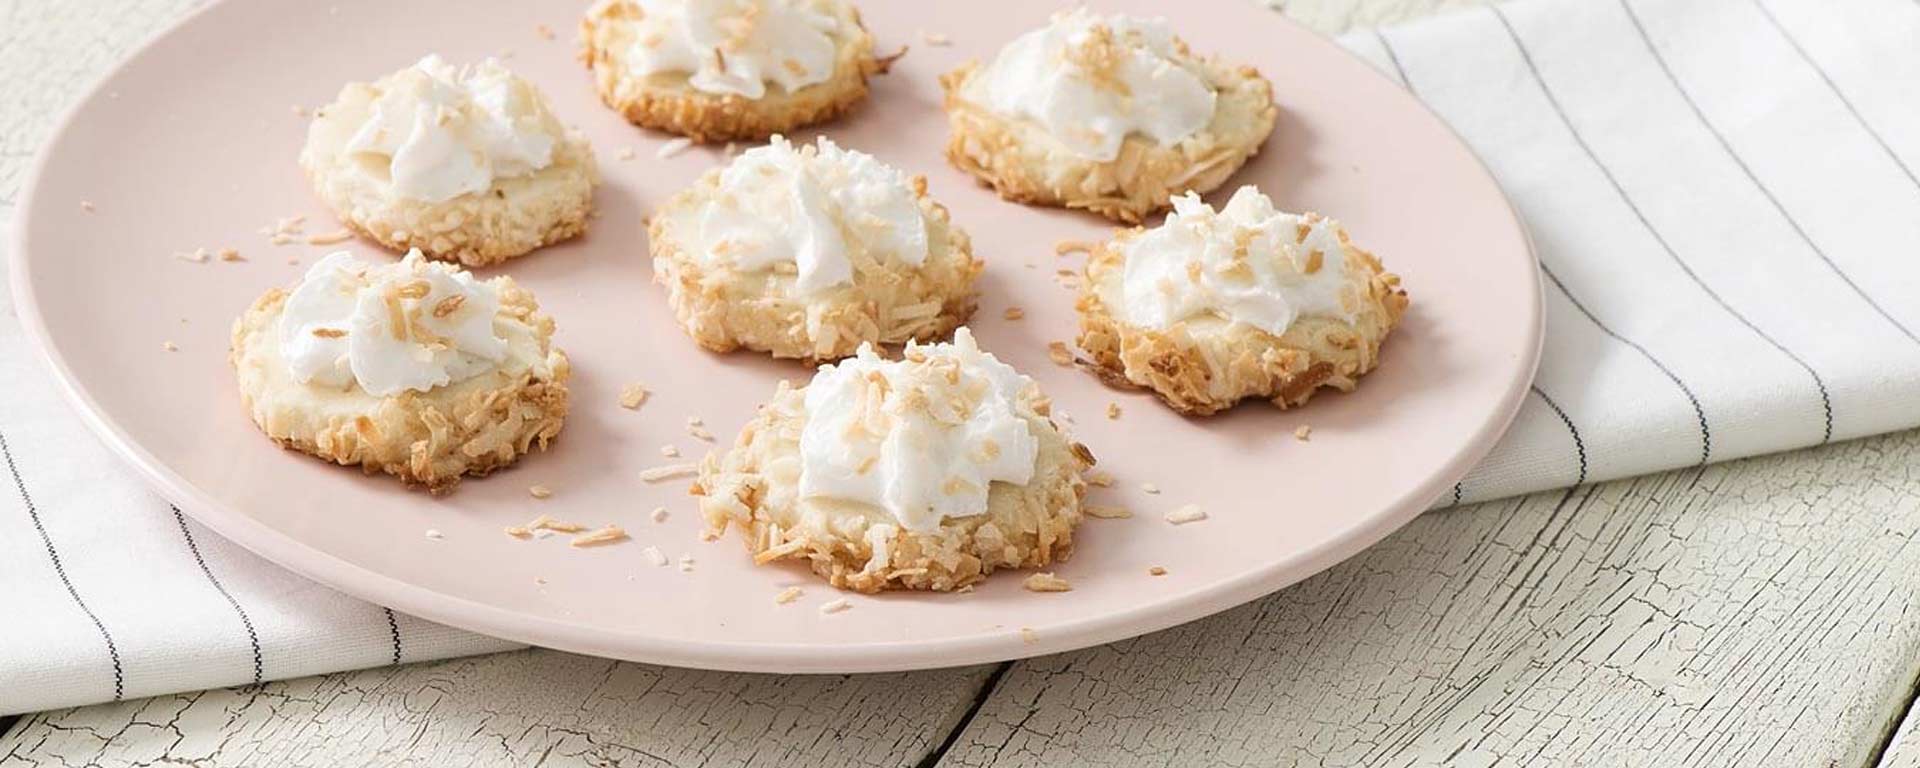 Photo for - Coconut Cloud Cookies